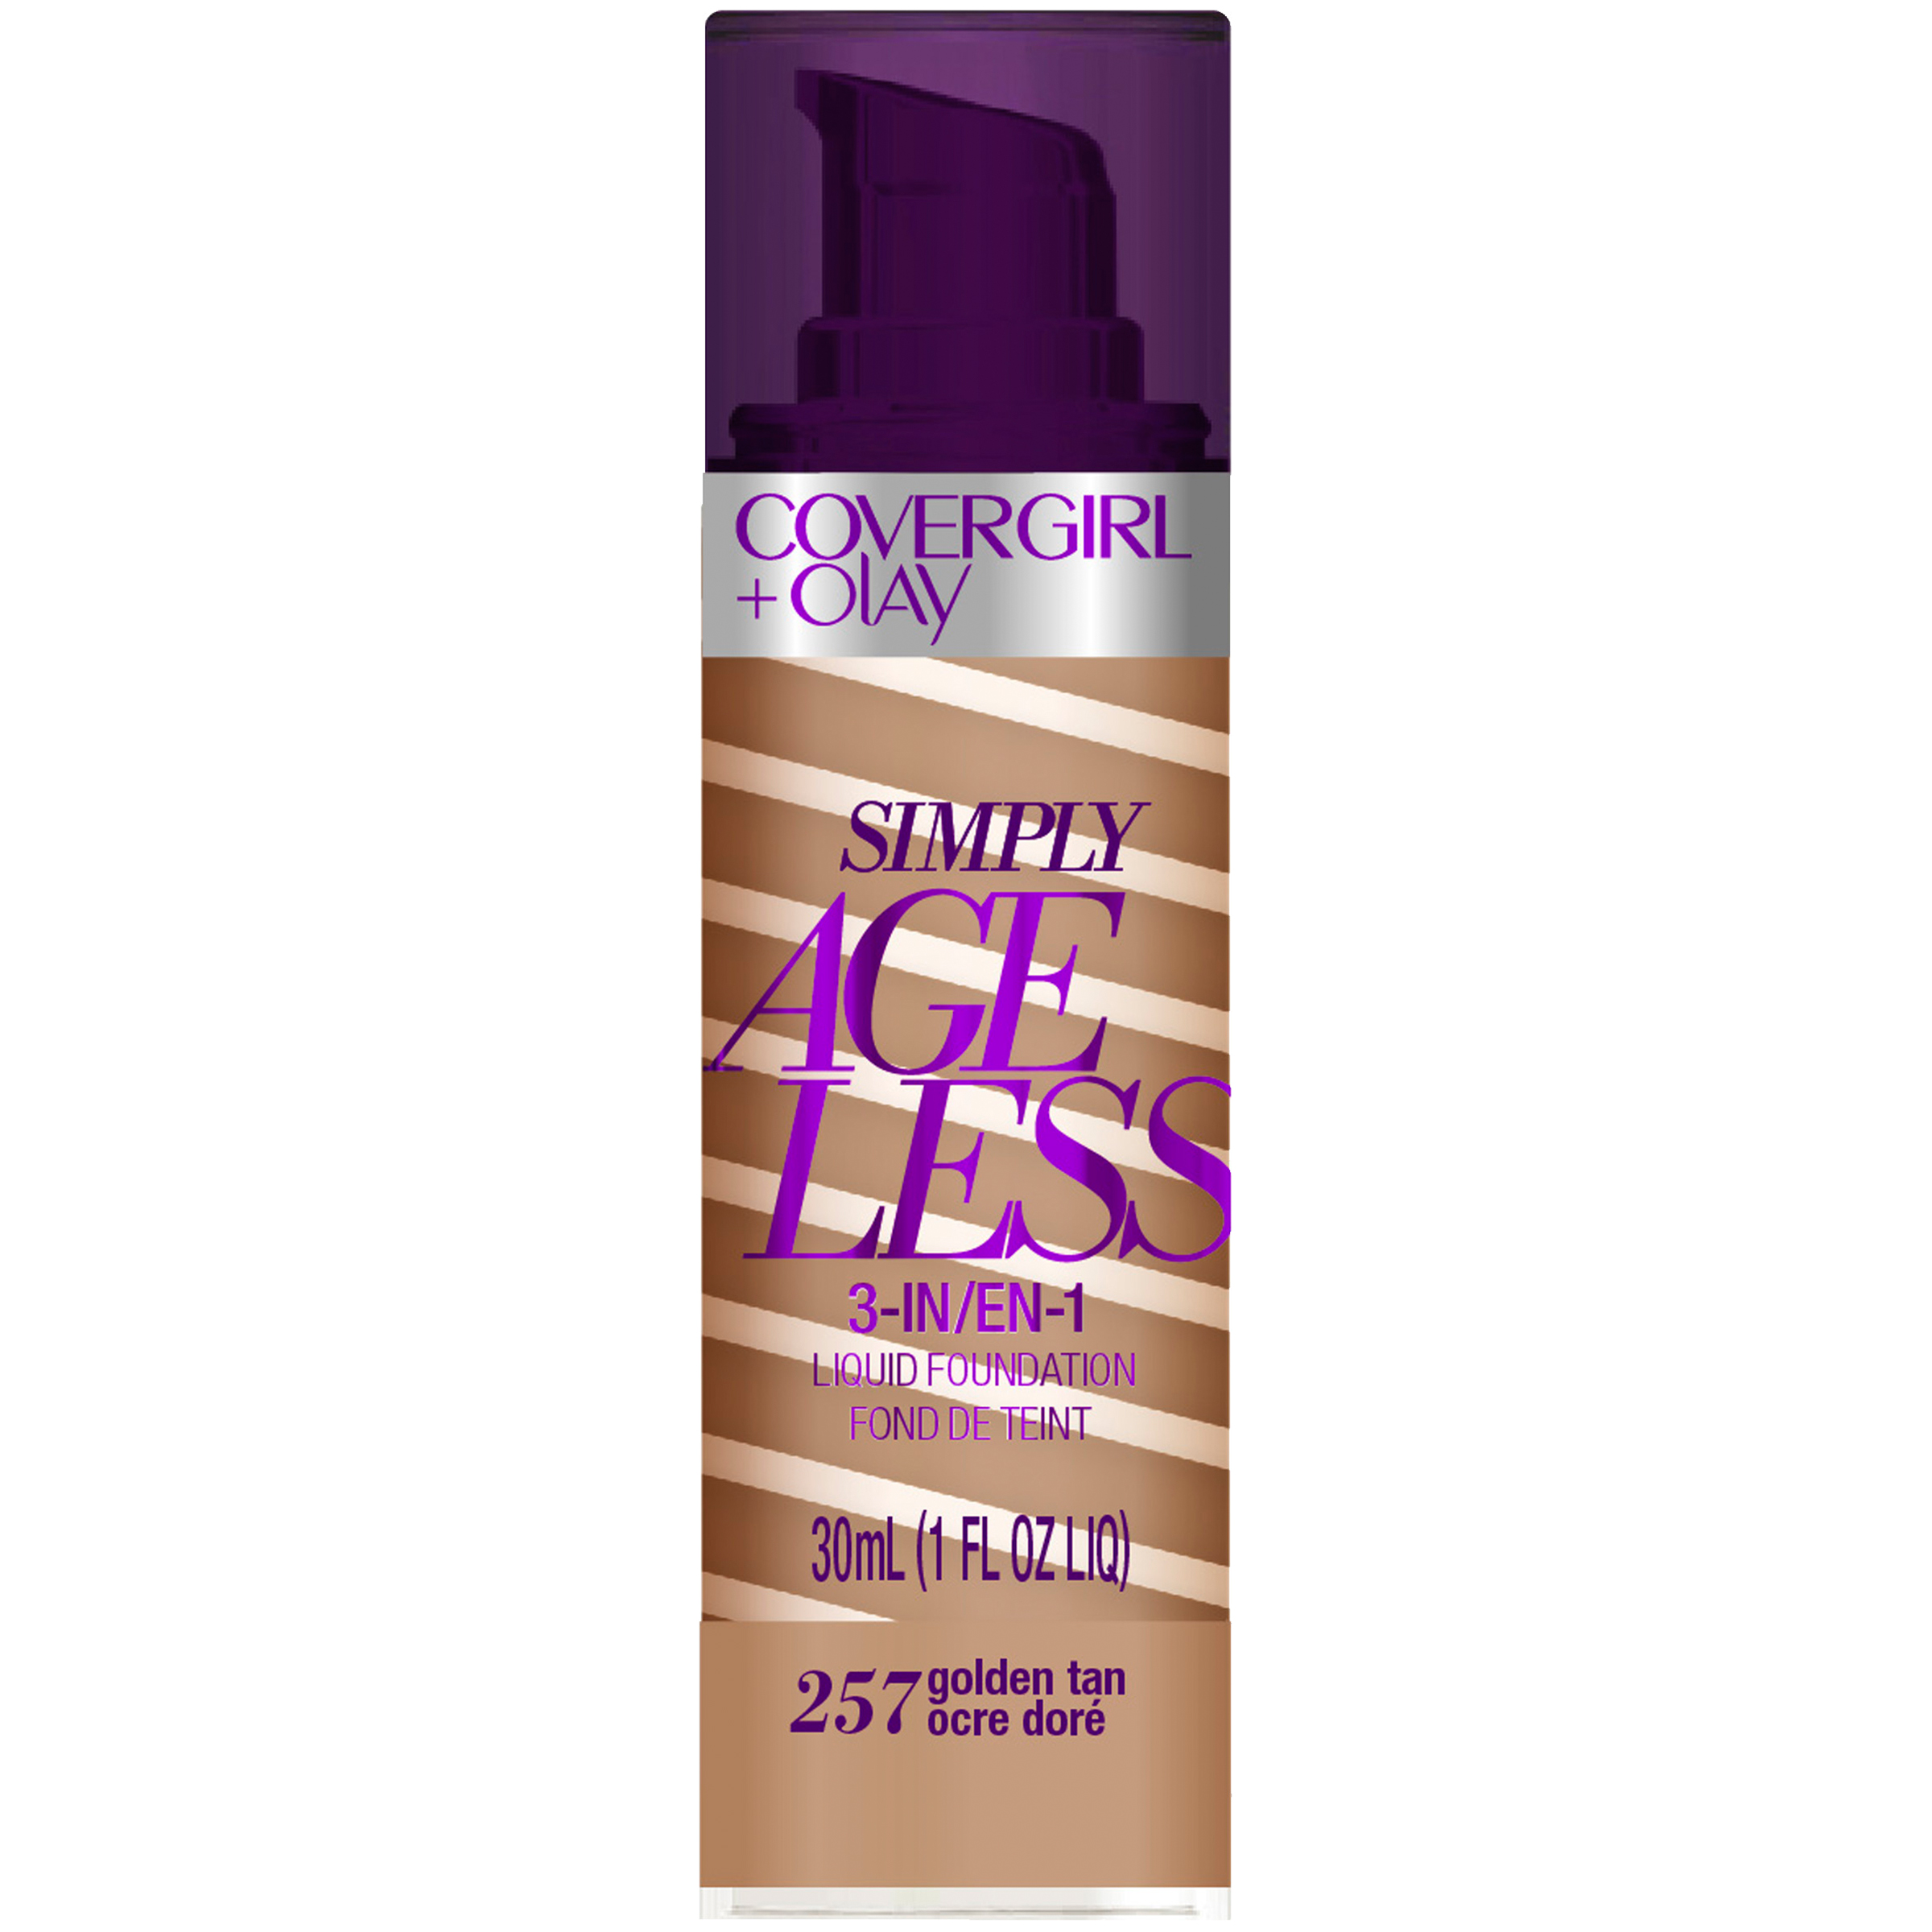 CoverGirl +Olay Simply Ageless 3-in-1 Foundation